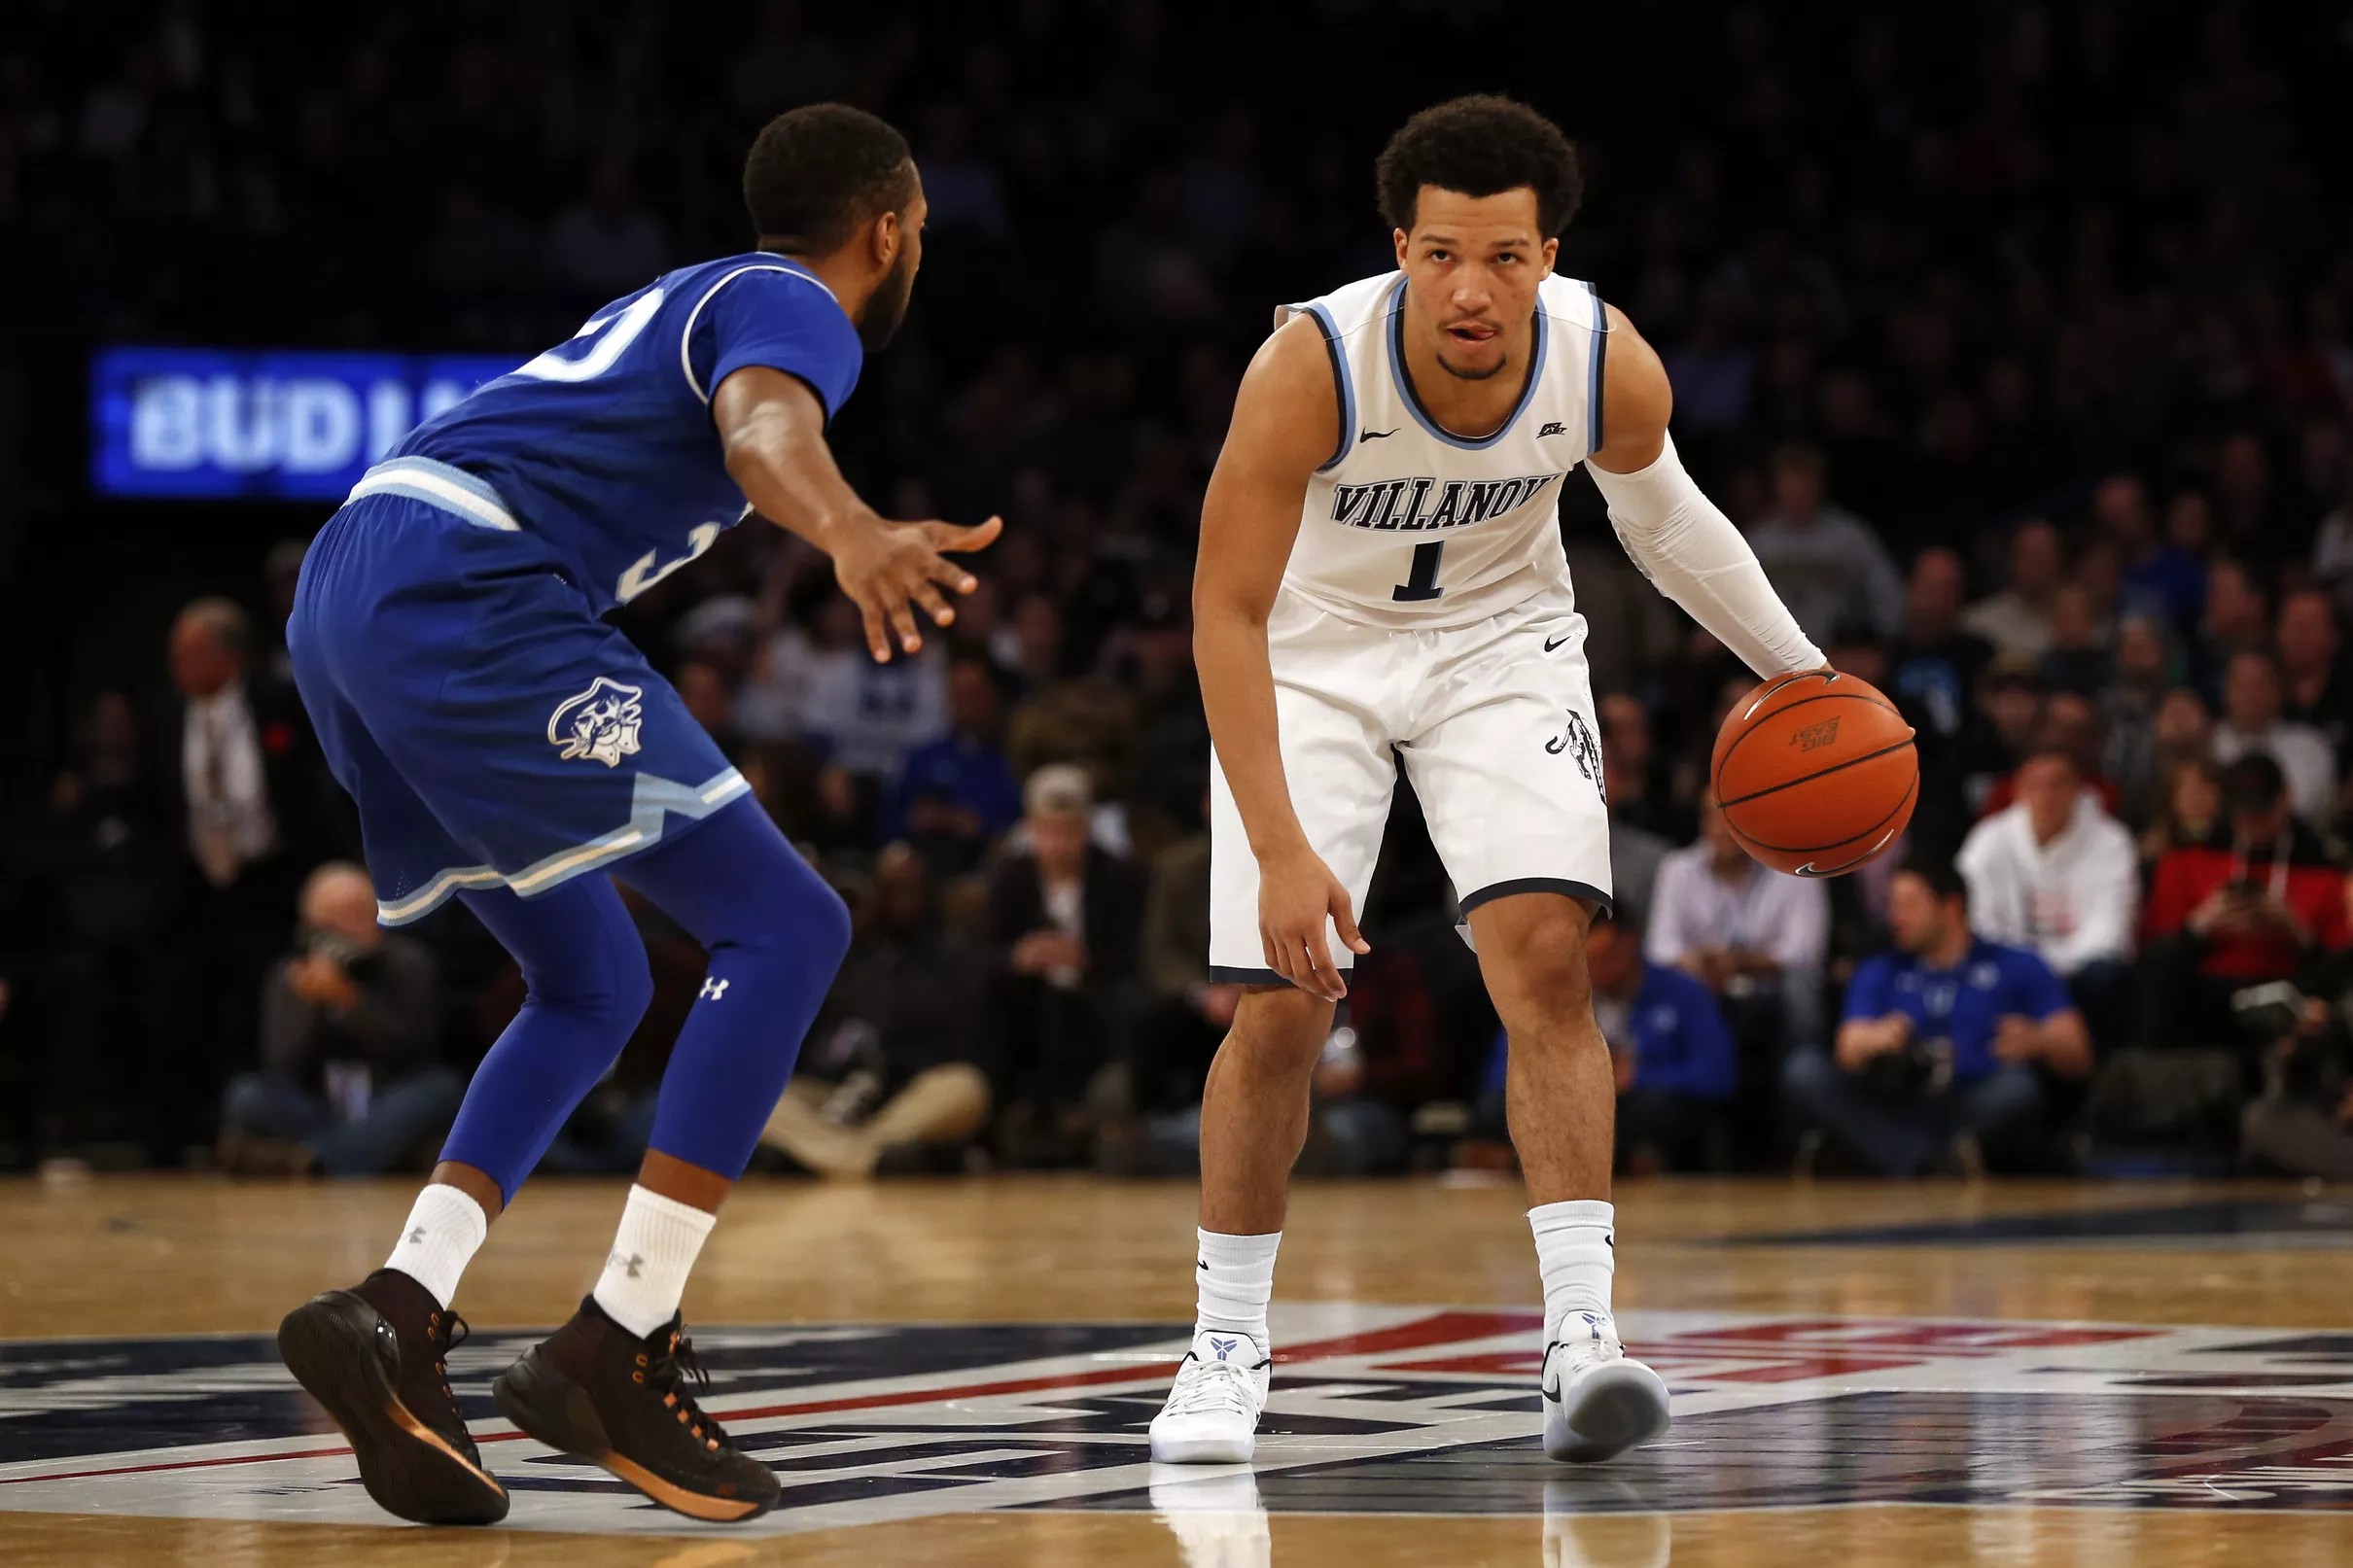 Big East Standings, Schedule, and Pick’em Contest (Week of 1/29)